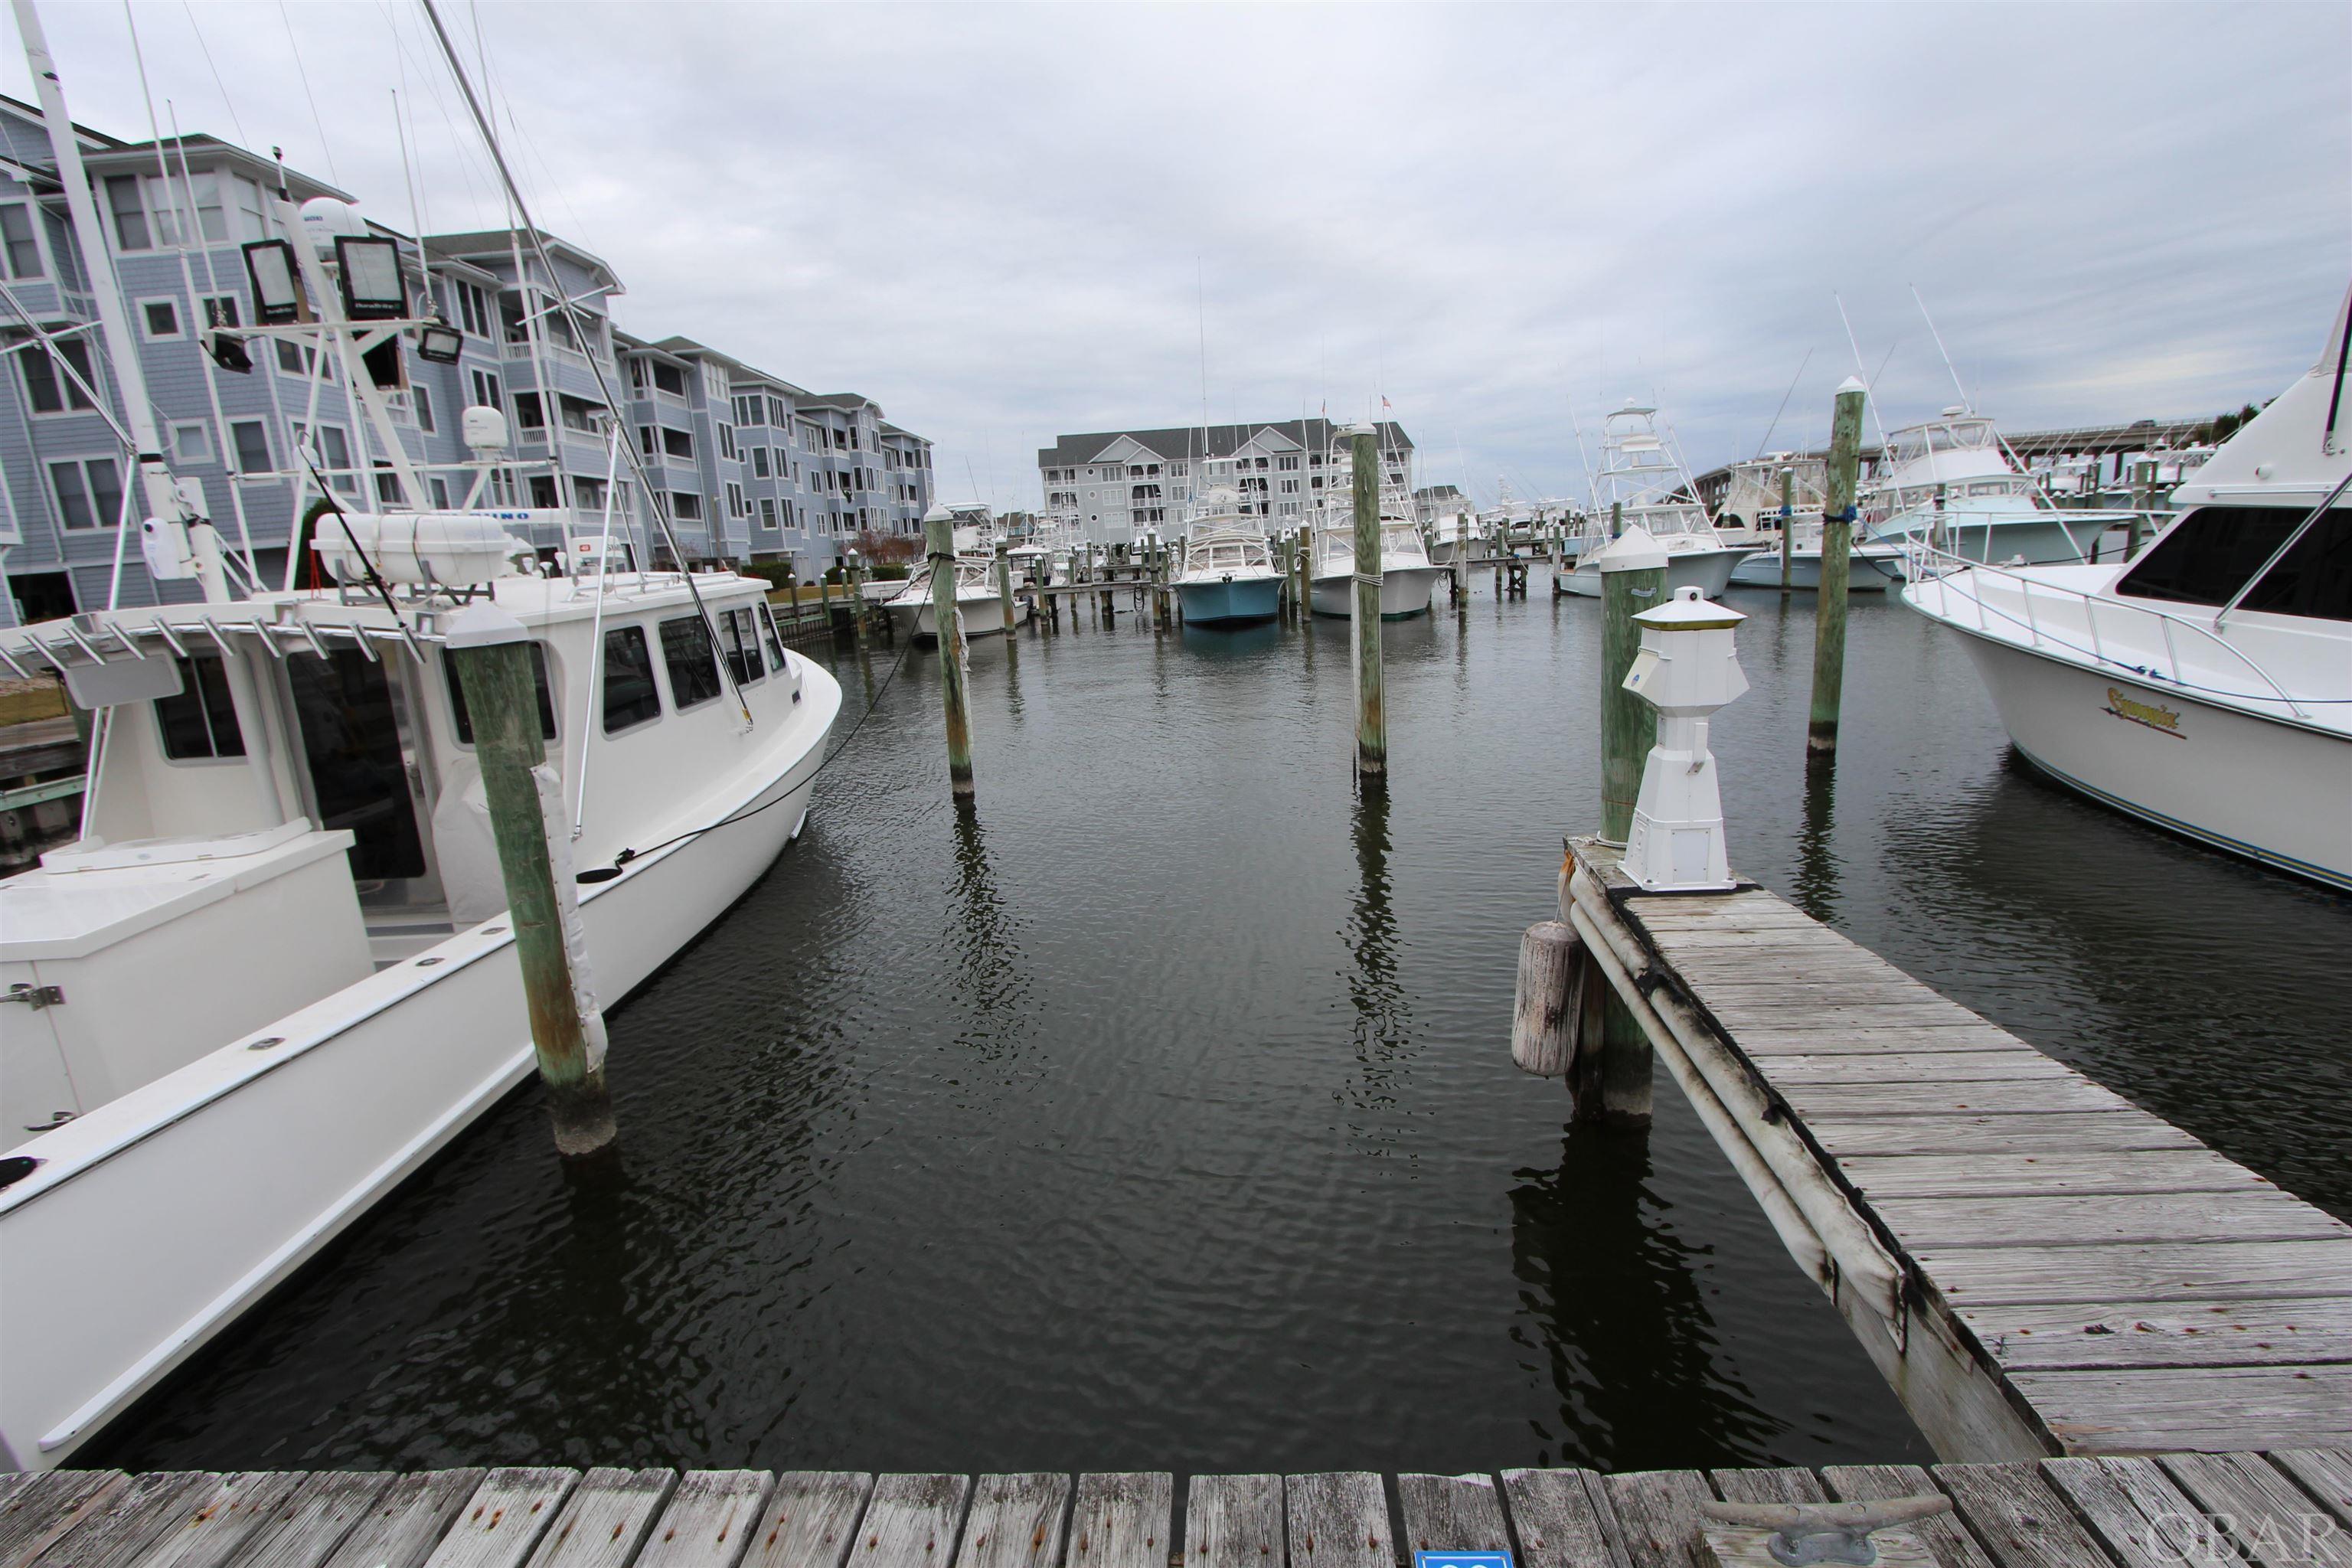 Nice 45’ slip with 5' spring line allowance up to 50'. Approximately 16' wide  Located on  B Dock.  Slip Owners may use the Pirates Cove HOA amenities for $5/per day, per/person.  Clubhouse/pool, tennis cts, playground, fitness center.   Come be a part of this well known, WORLD CLASS MARINA!